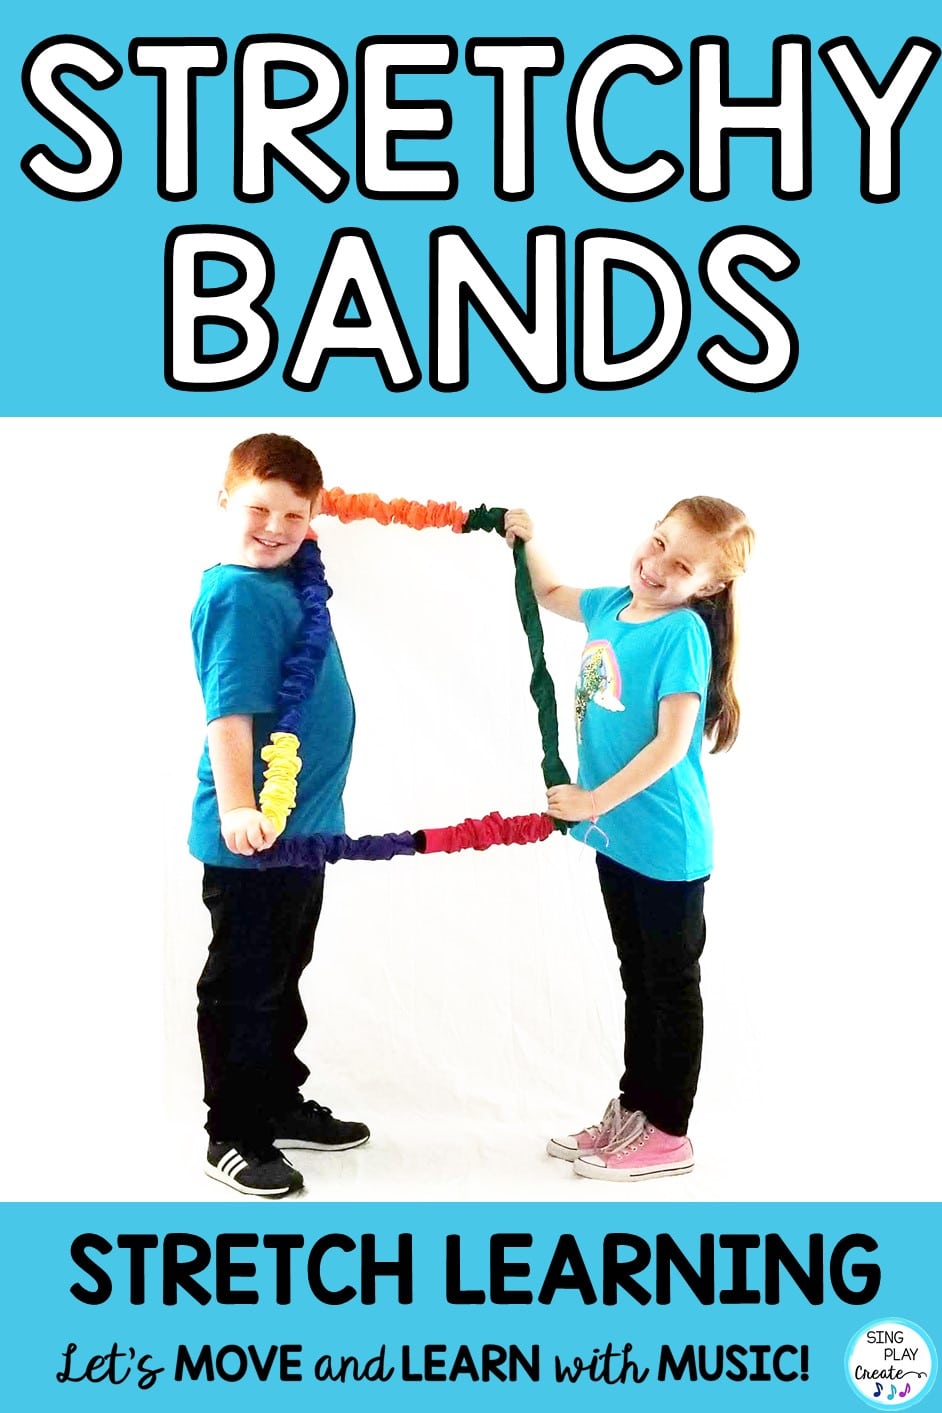 Sing and play 3. Stretching Bands. Stretch Learning. Картинка Let's move and learn with Music. Stretch Band retard.